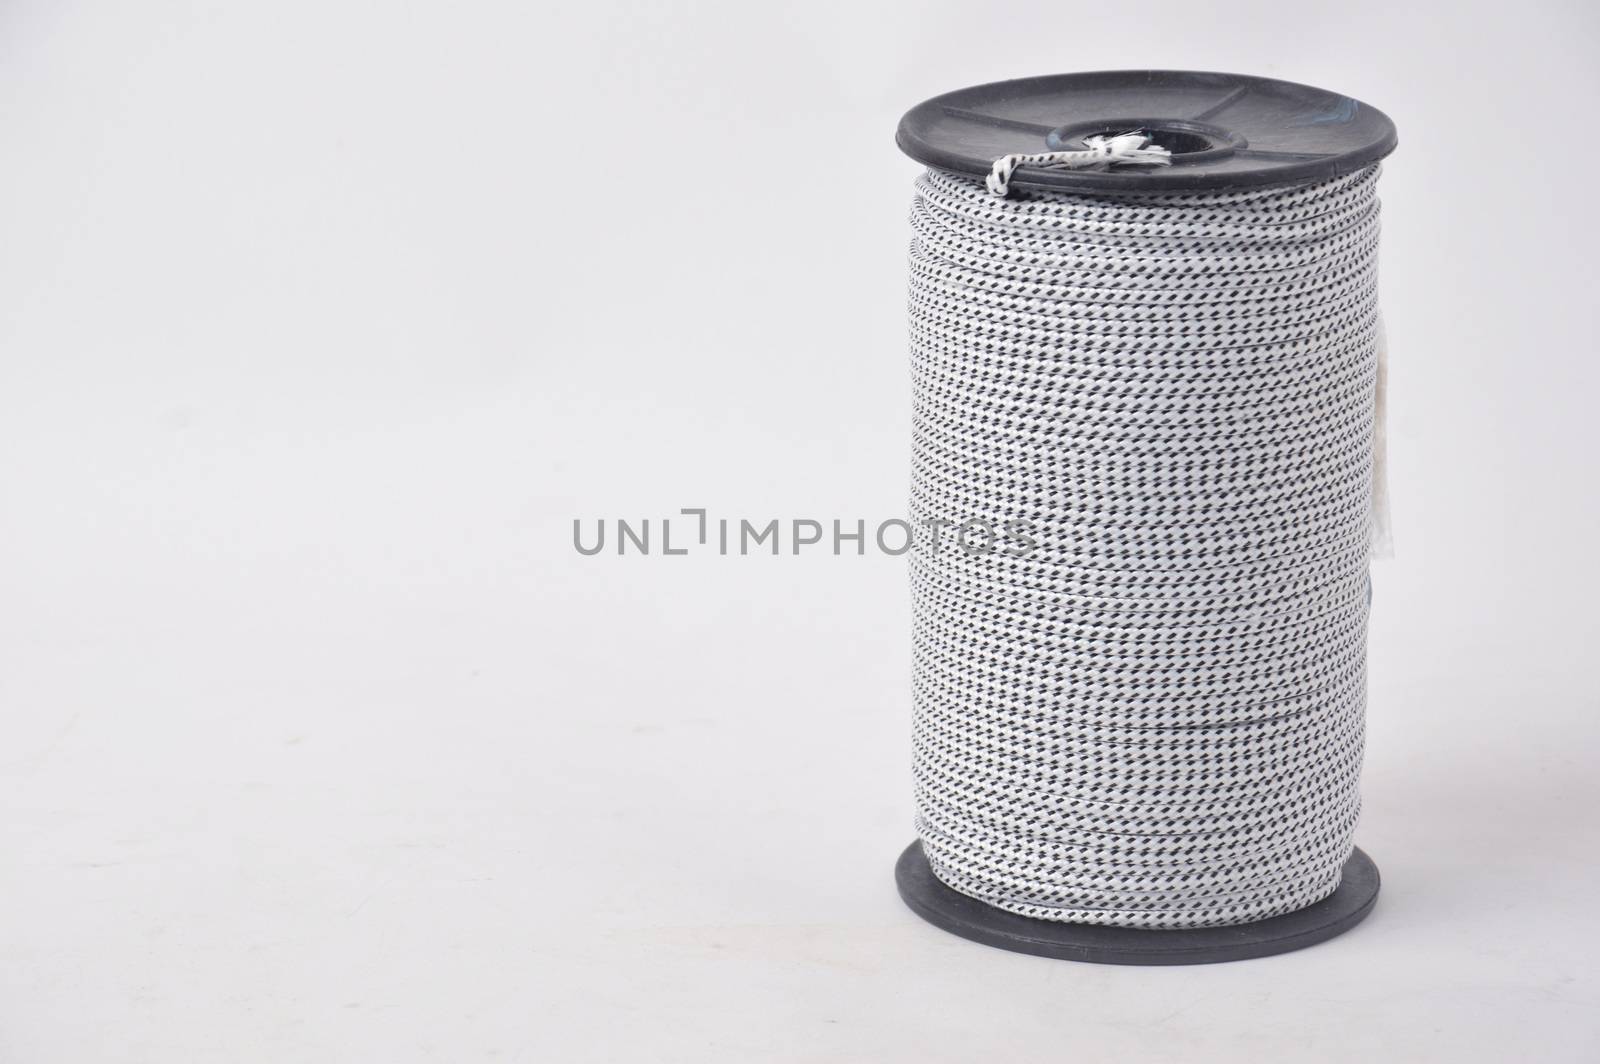 black and white spools of thread on white background